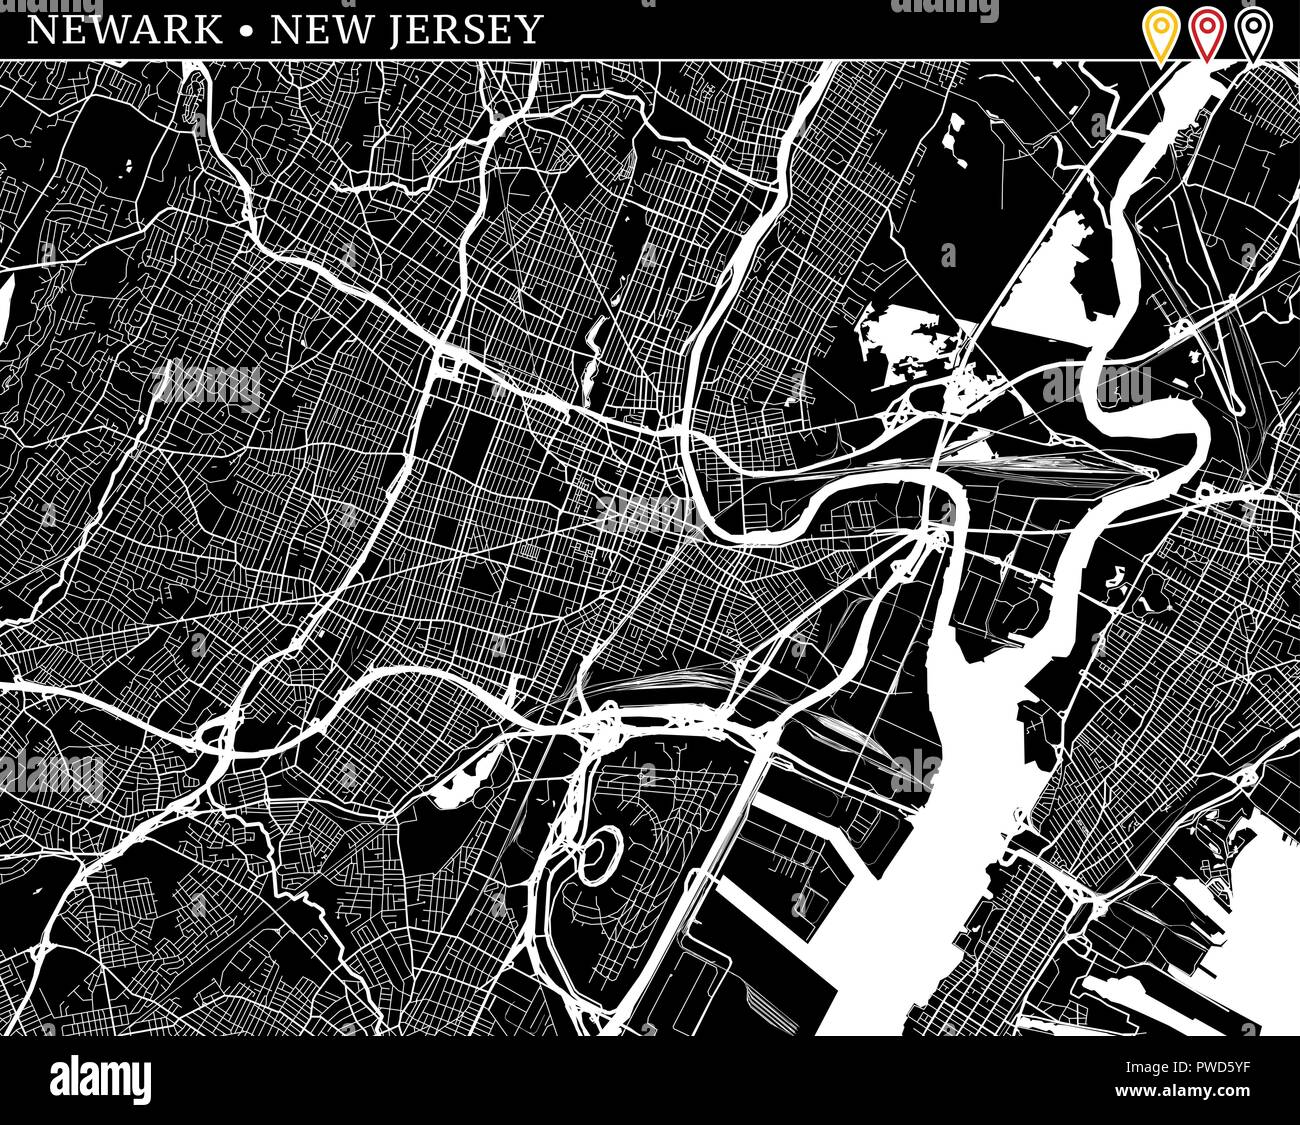 Simple map of Newark, New Jersey, USA. Black and white version for ...